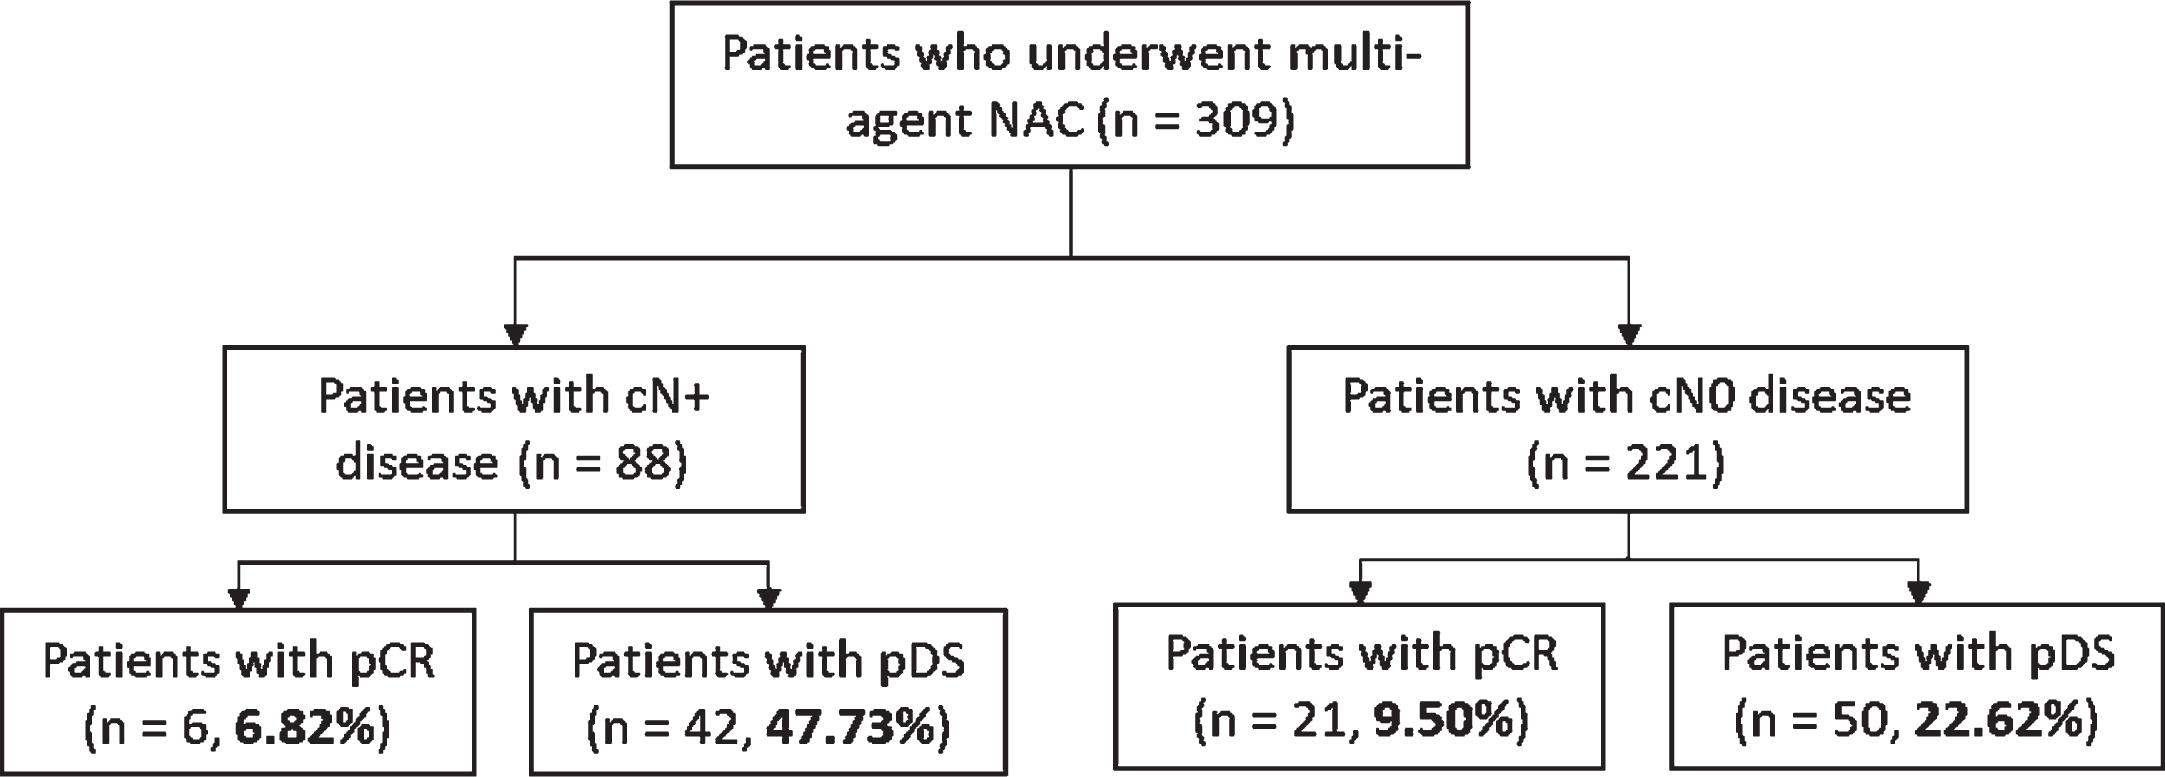 Impact Of Neoadjuvant Chemotherapy For Upper Tract Urothelial Carcinoma 4310